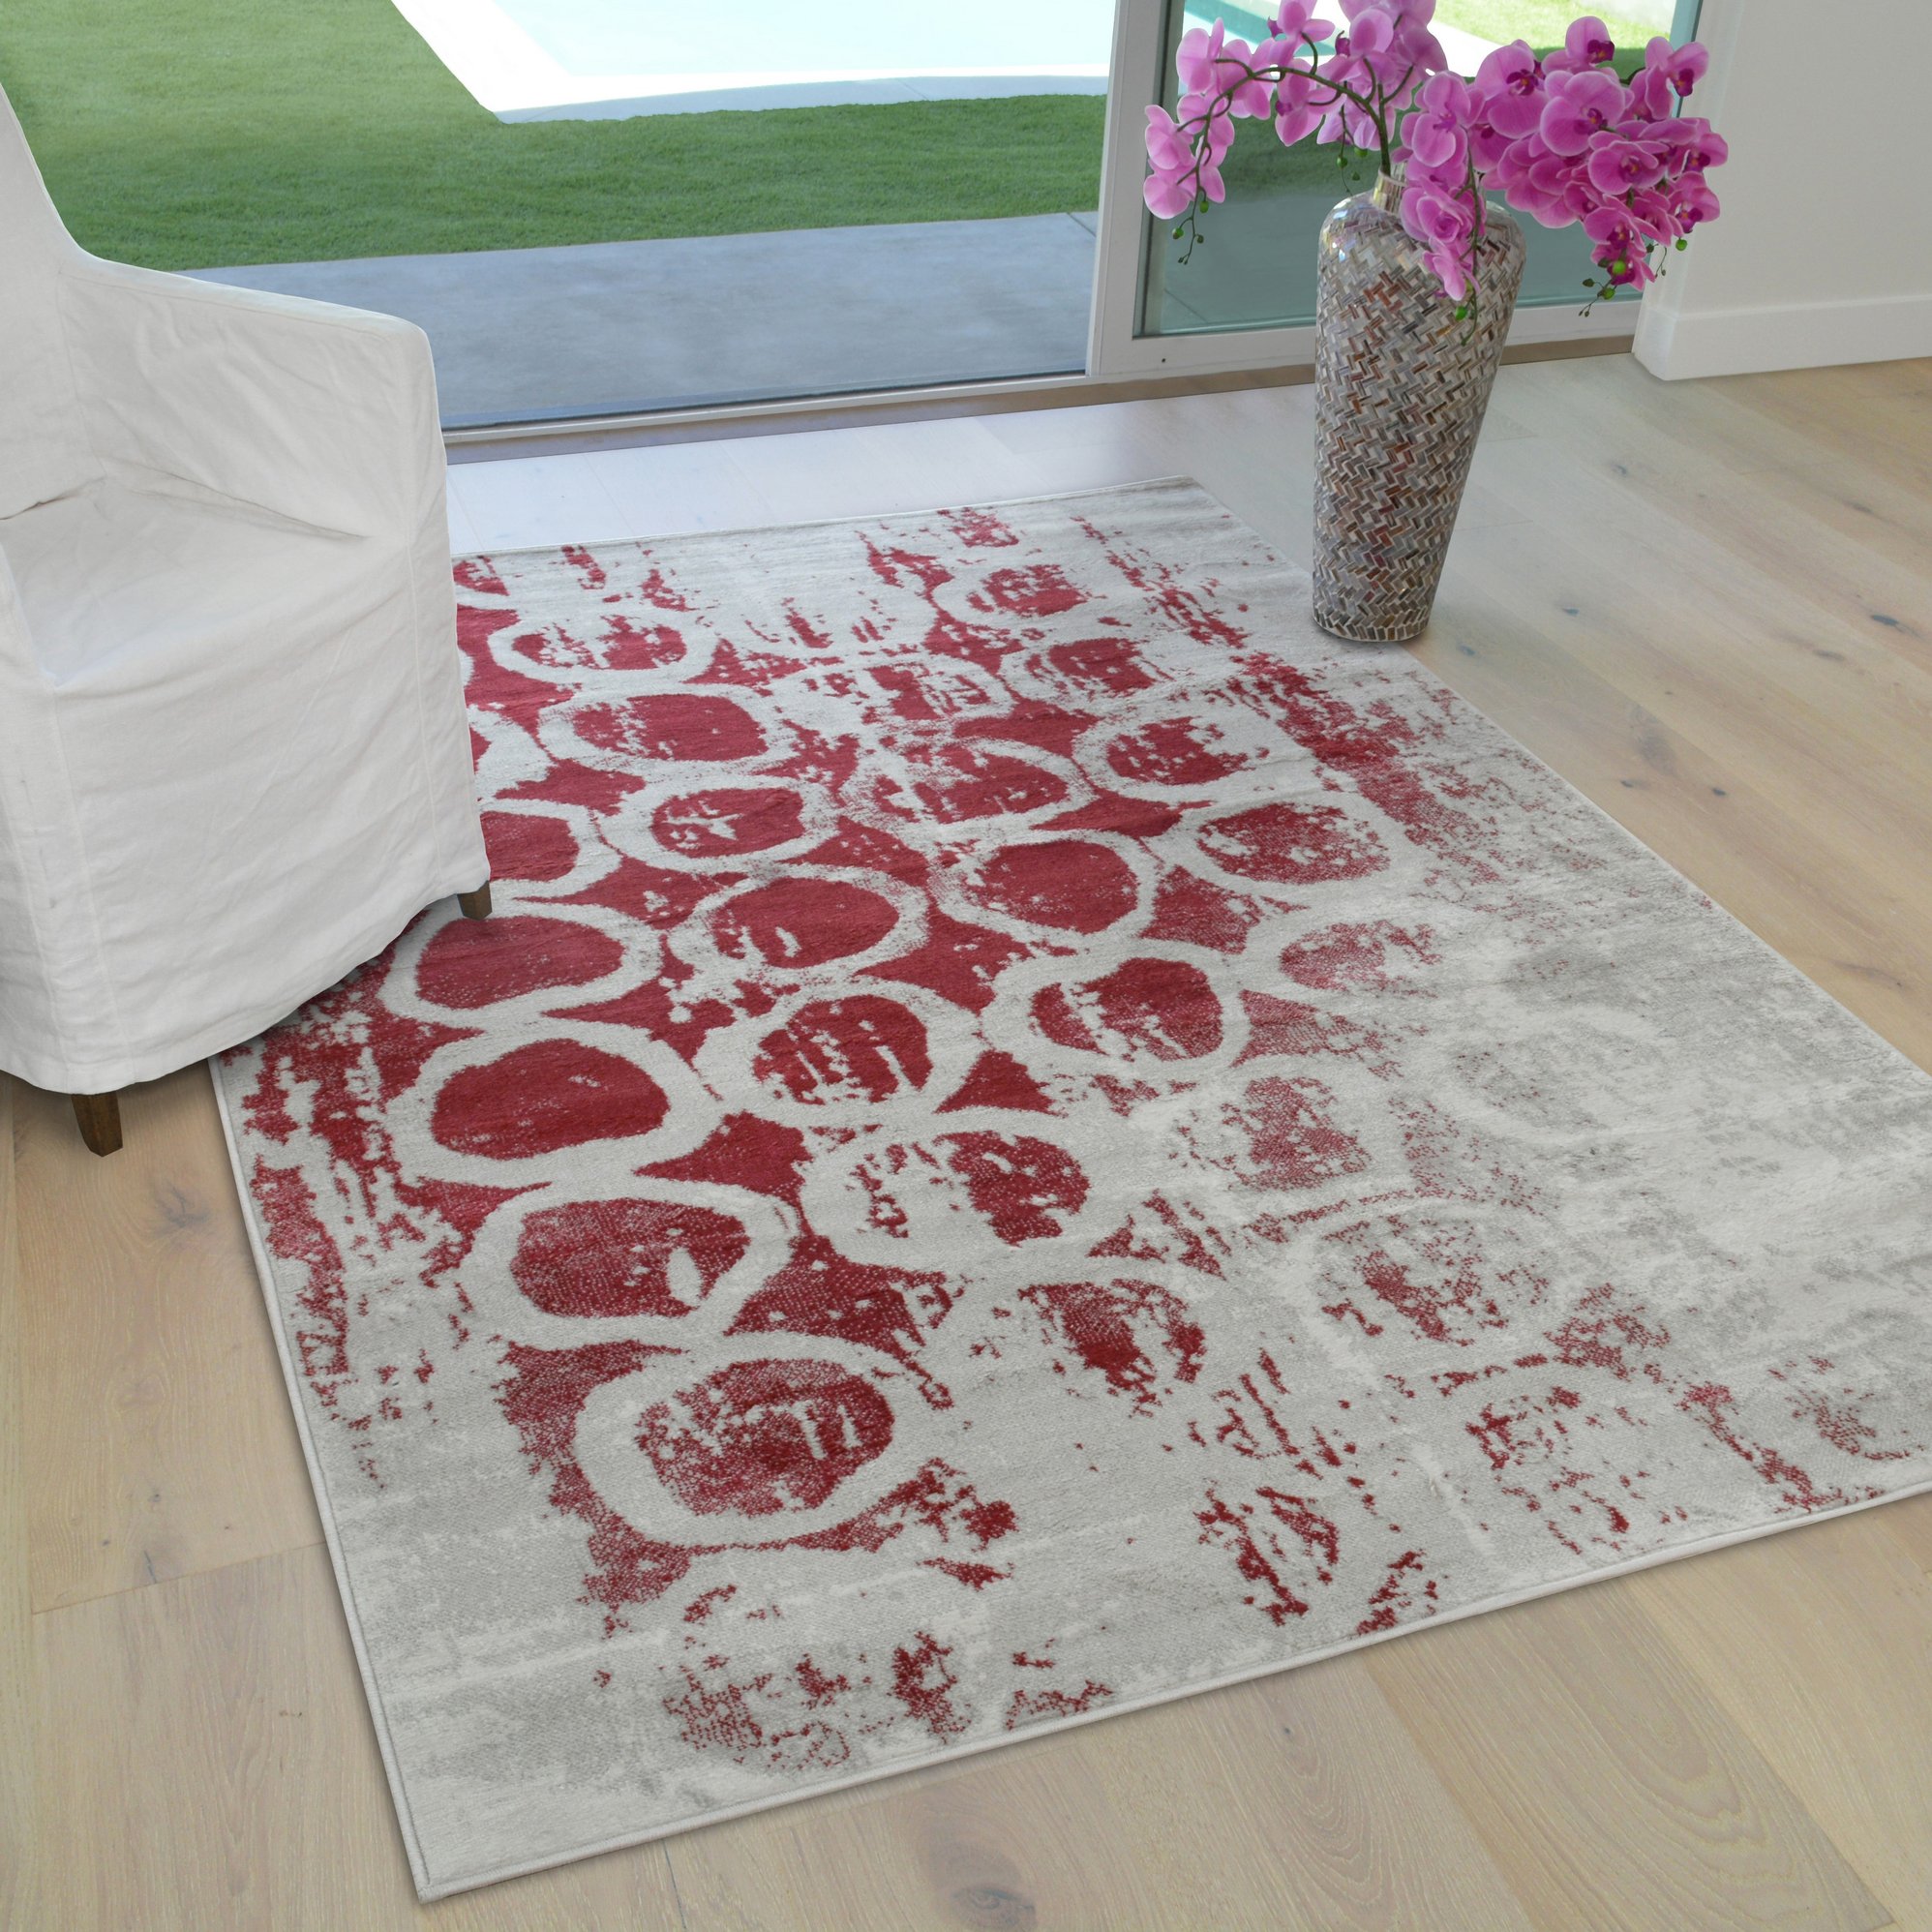 HR red Gray Rug Distressed Area Rug Bohemian Modern Abstract Circle Geometric Printed Contemporary 8x10 Rugs, Cherry red Carpet - image 1 of 8